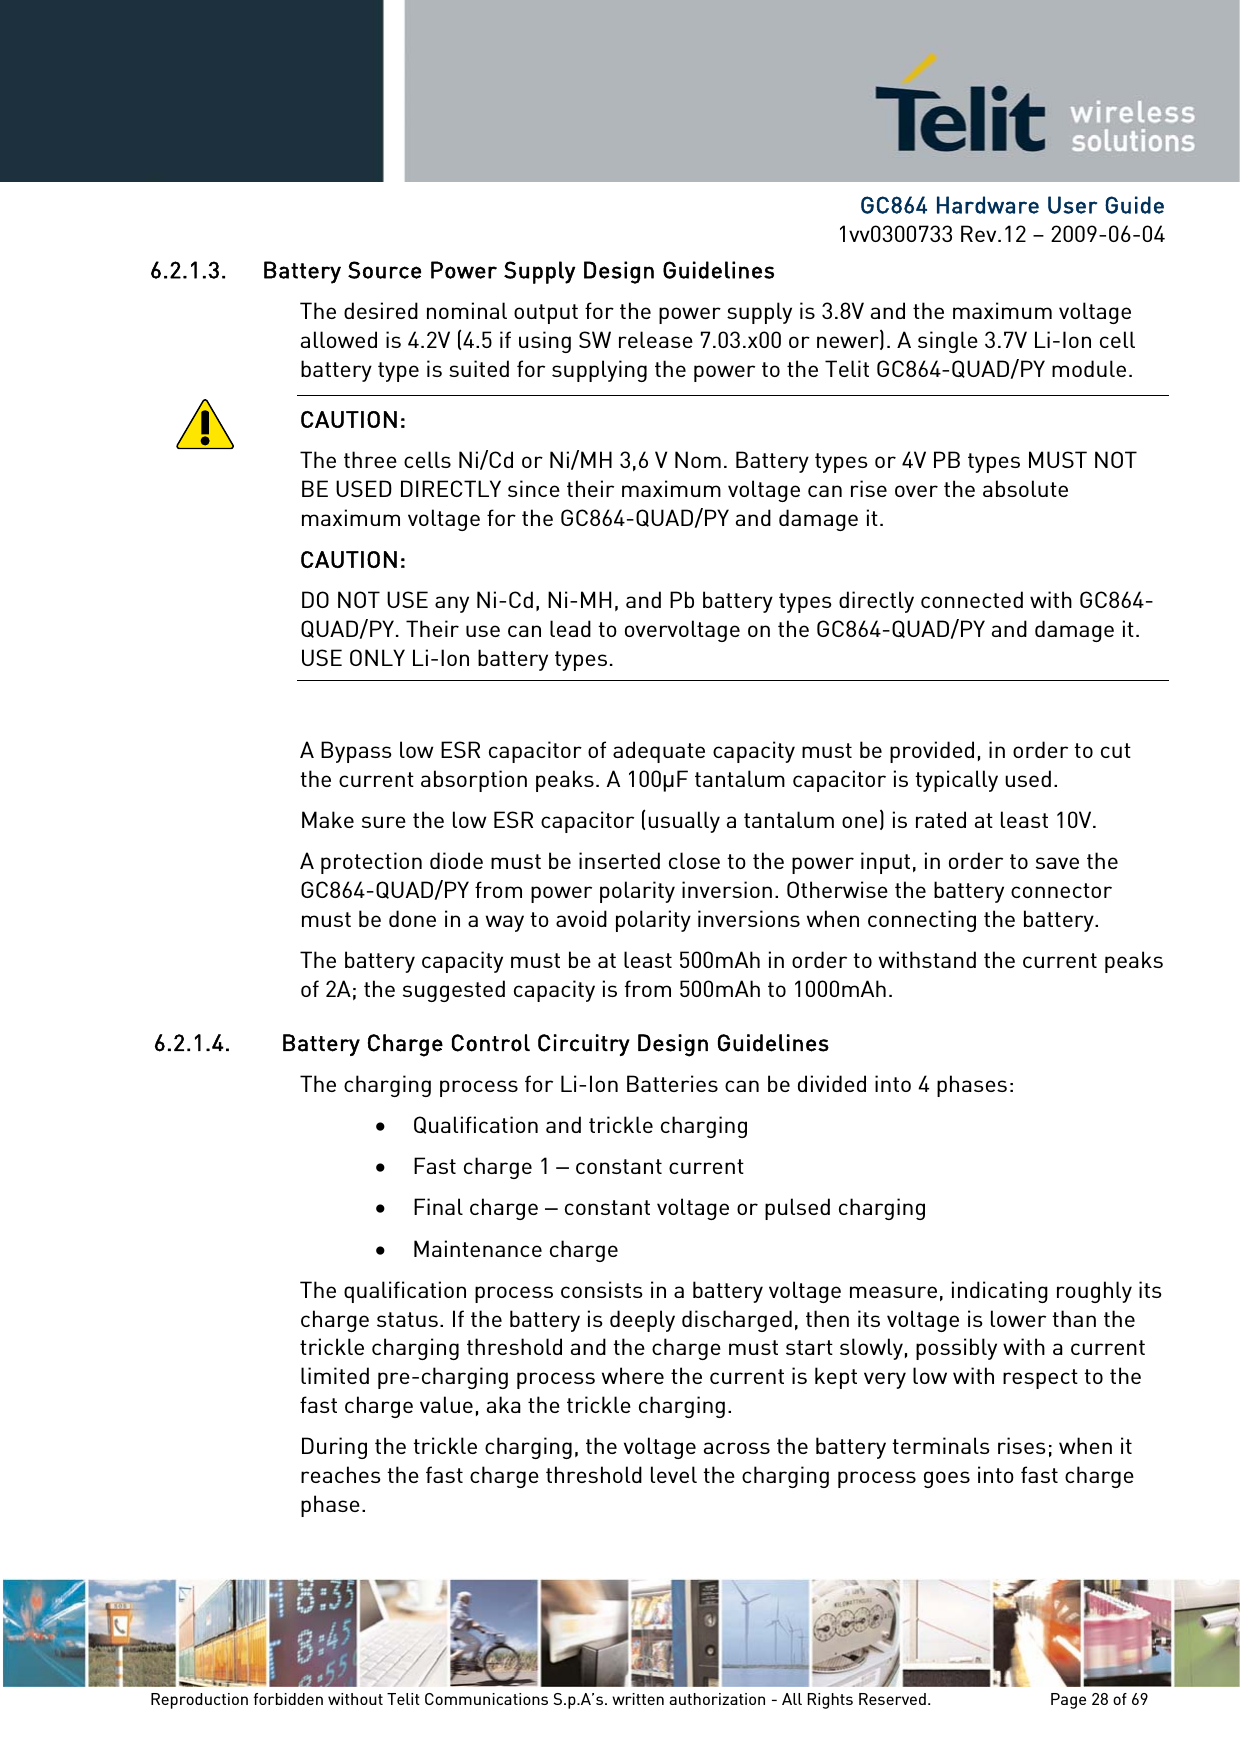      GC864 Hardware User Guide 1vv0300733 Rev.12 – 2009-06-04 6.2.1.3. Battery Source Power Supply Design Guidelines The desired nominal output for the power supply is 3.8V and the maximum voltage allowed is 4.2V (4.5 if using SW release 7.03.x00 or newer). A single 3.7V Li-Ion cell battery type is suited for supplying the power to the Telit GC864-QUAD/PY module. CAUTION: The three cells Ni/Cd or Ni/MH 3,6 V Nom. Battery types or 4V PB types MUST NOT BE USED DIRECTLY since their maximum voltage can rise over the absolute maximum voltage for the GC864-QUAD/PY and damage it. CAUTION: DO NOT USE any Ni-Cd, Ni-MH, and Pb battery types directly connected with GC864-QUAD/PY. Their use can lead to overvoltage on the GC864-QUAD/PY and damage it. USE ONLY Li-Ion battery types.  A Bypass low ESR capacitor of adequate capacity must be provided, in order to cut the current absorption peaks. A 100F tantalum capacitor is typically used. Make sure the low ESR capacitor (usually a tantalum one) is rated at least 10V. A protection diode must be inserted close to the power input, in order to save the GC864-QUAD/PY from power polarity inversion. Otherwise the battery connector must be done in a way to avoid polarity inversions when connecting the battery. The battery capacity must be at least 500mAh in order to withstand the current peaks of 2A; the suggested capacity is from 500mAh to 1000mAh. 6.2.1.4. Battery Charge Control Circuitry Design Guidelines The charging process for Li-Ion Batteries can be divided into 4 phases: • Qualification and trickle charging • Fast charge 1 – constant current • Final charge – constant voltage or pulsed charging • Maintenance charge The qualification process consists in a battery voltage measure, indicating roughly its charge status. If the battery is deeply discharged, then its voltage is lower than the trickle charging threshold and the charge must start slowly, possibly with a current limited pre-charging process where the current is kept very low with respect to the fast charge value, aka the trickle charging. During the trickle charging, the voltage across the battery terminals rises; when it reaches the fast charge threshold level the charging process goes into fast charge phase. Reproduction forbidden without Telit Communications S.p.A’s. written authorization - All Rights Reserved.    Page 28 of 69  